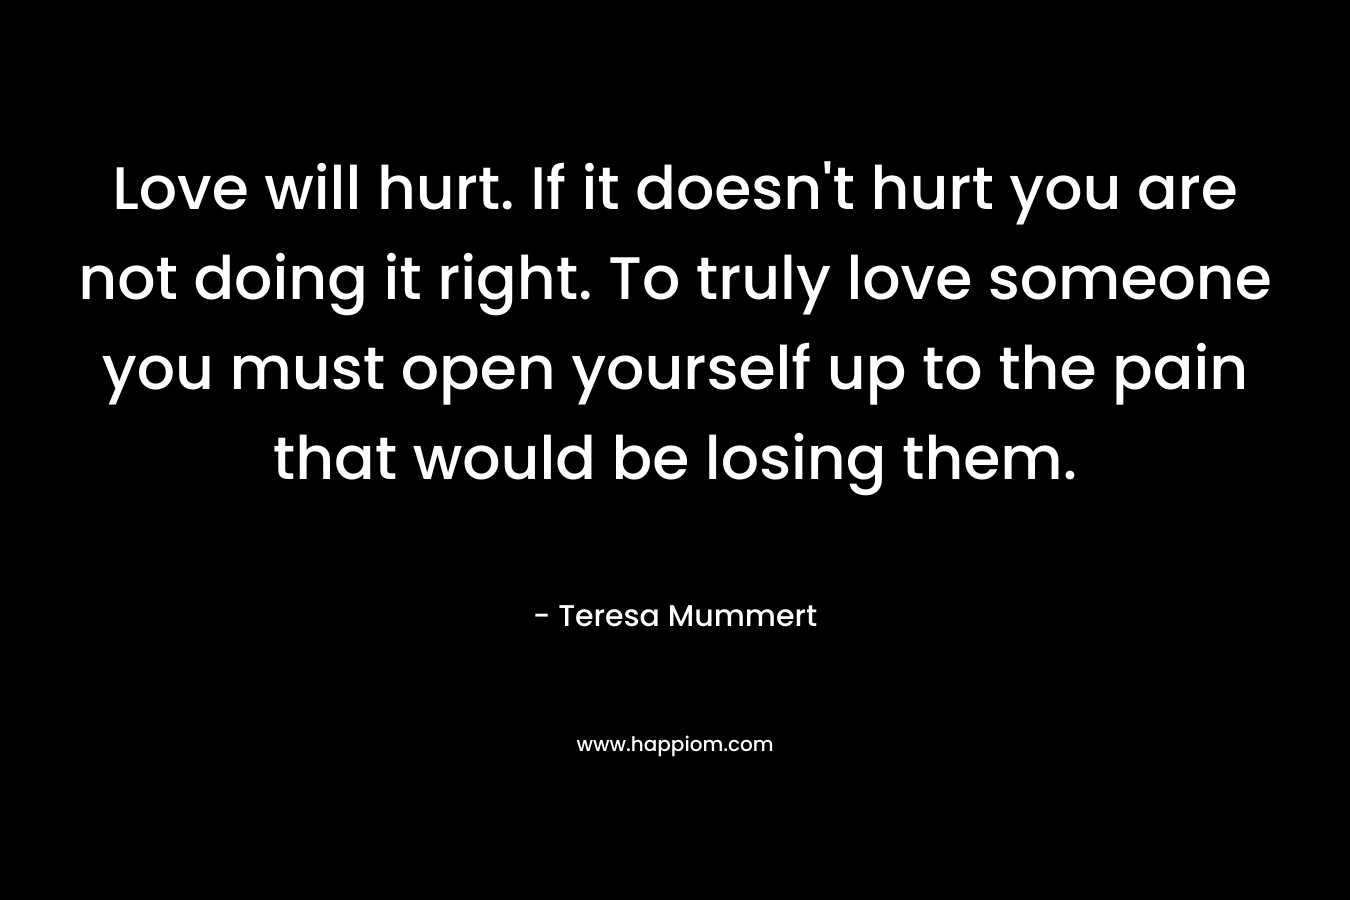 Love will hurt. If it doesn’t hurt you are not doing it right. To truly love someone you must open yourself up to the pain that would be losing them. – Teresa Mummert